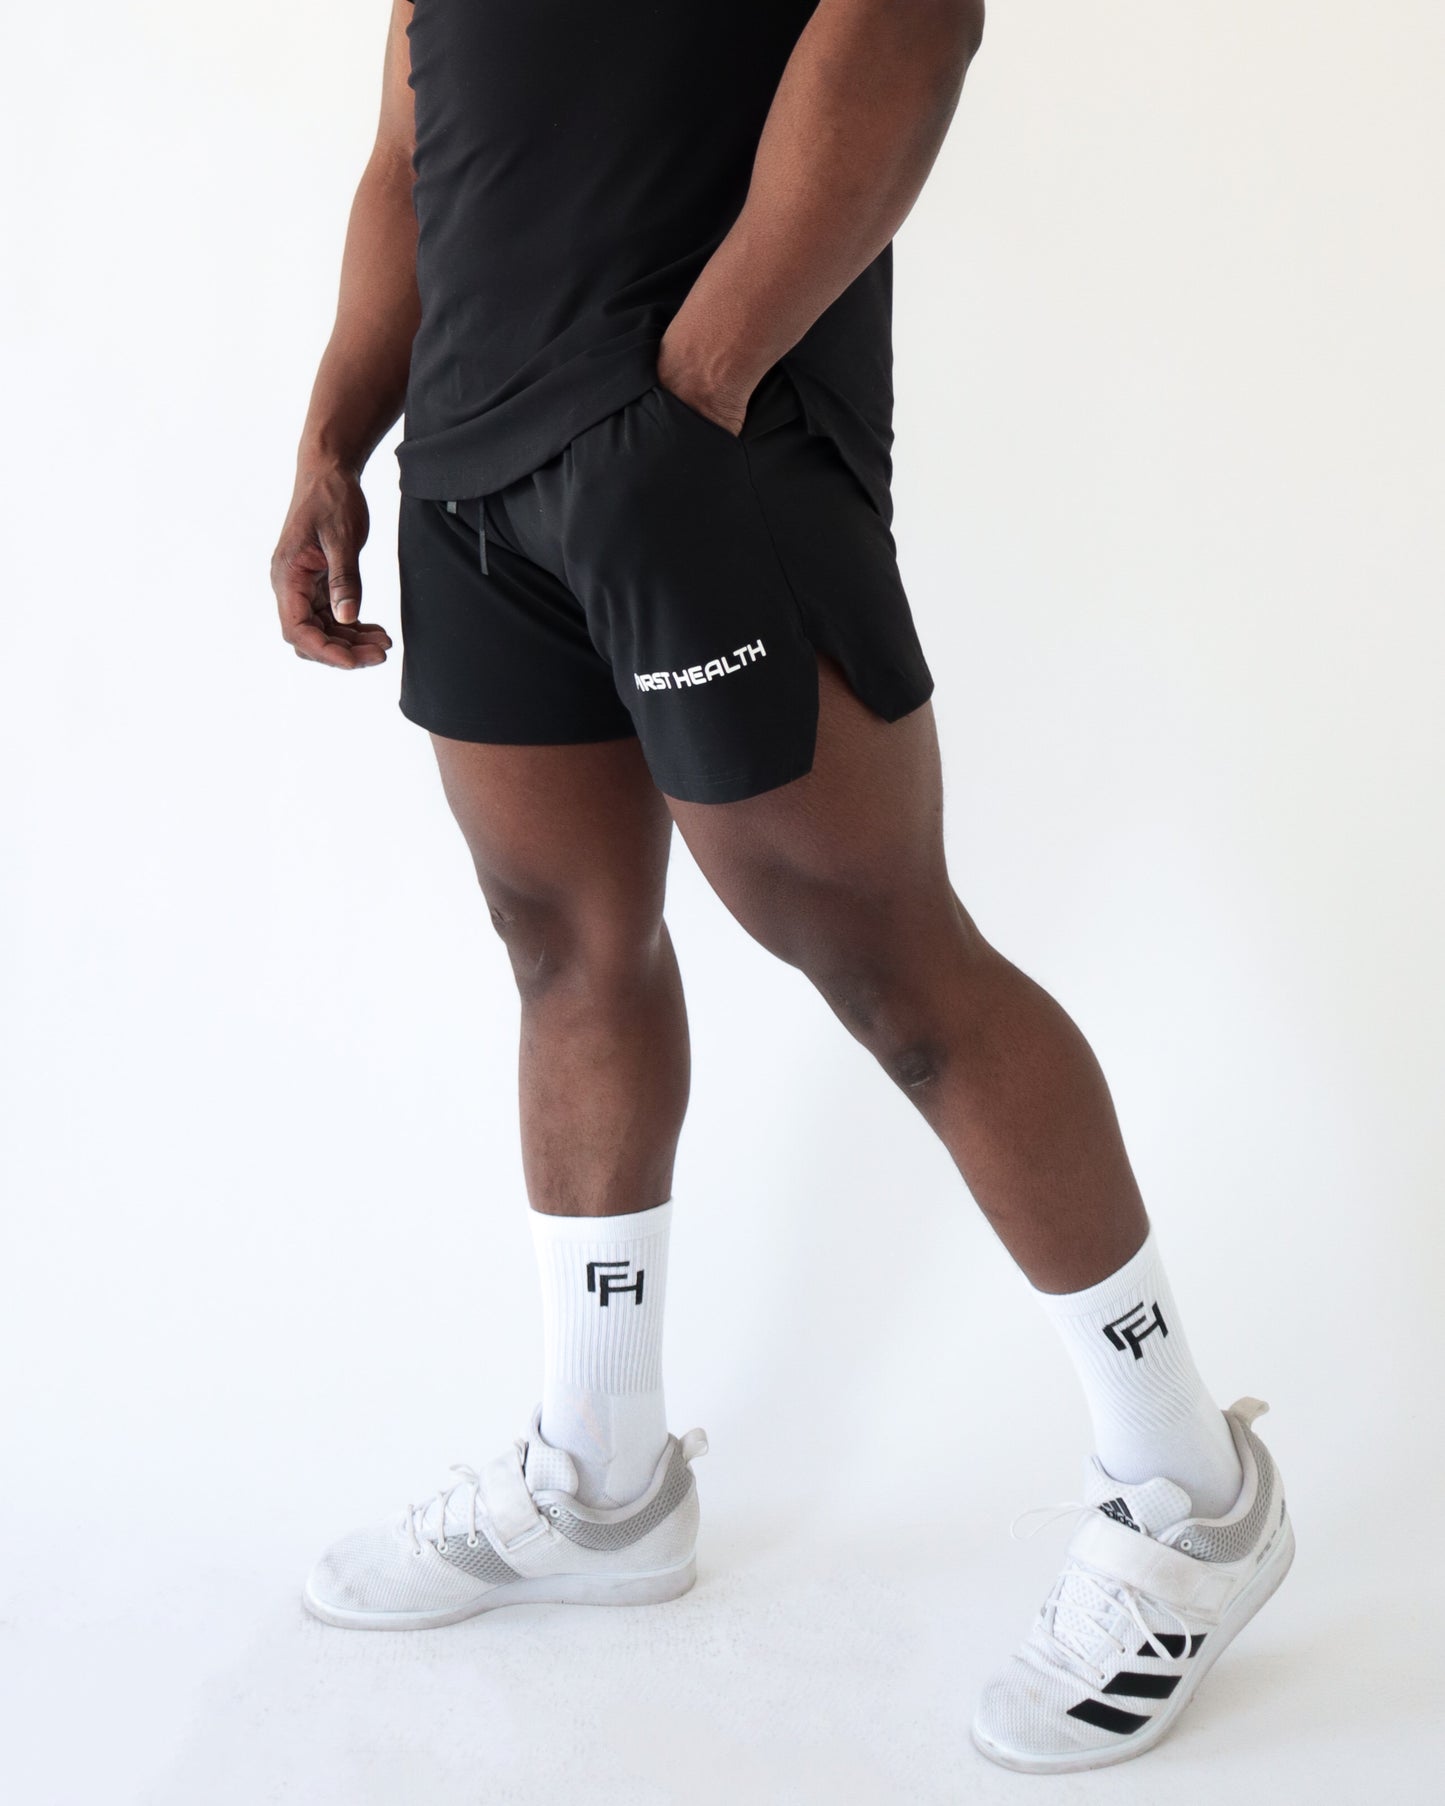 ELEVATE SHORTS 5" - Panther